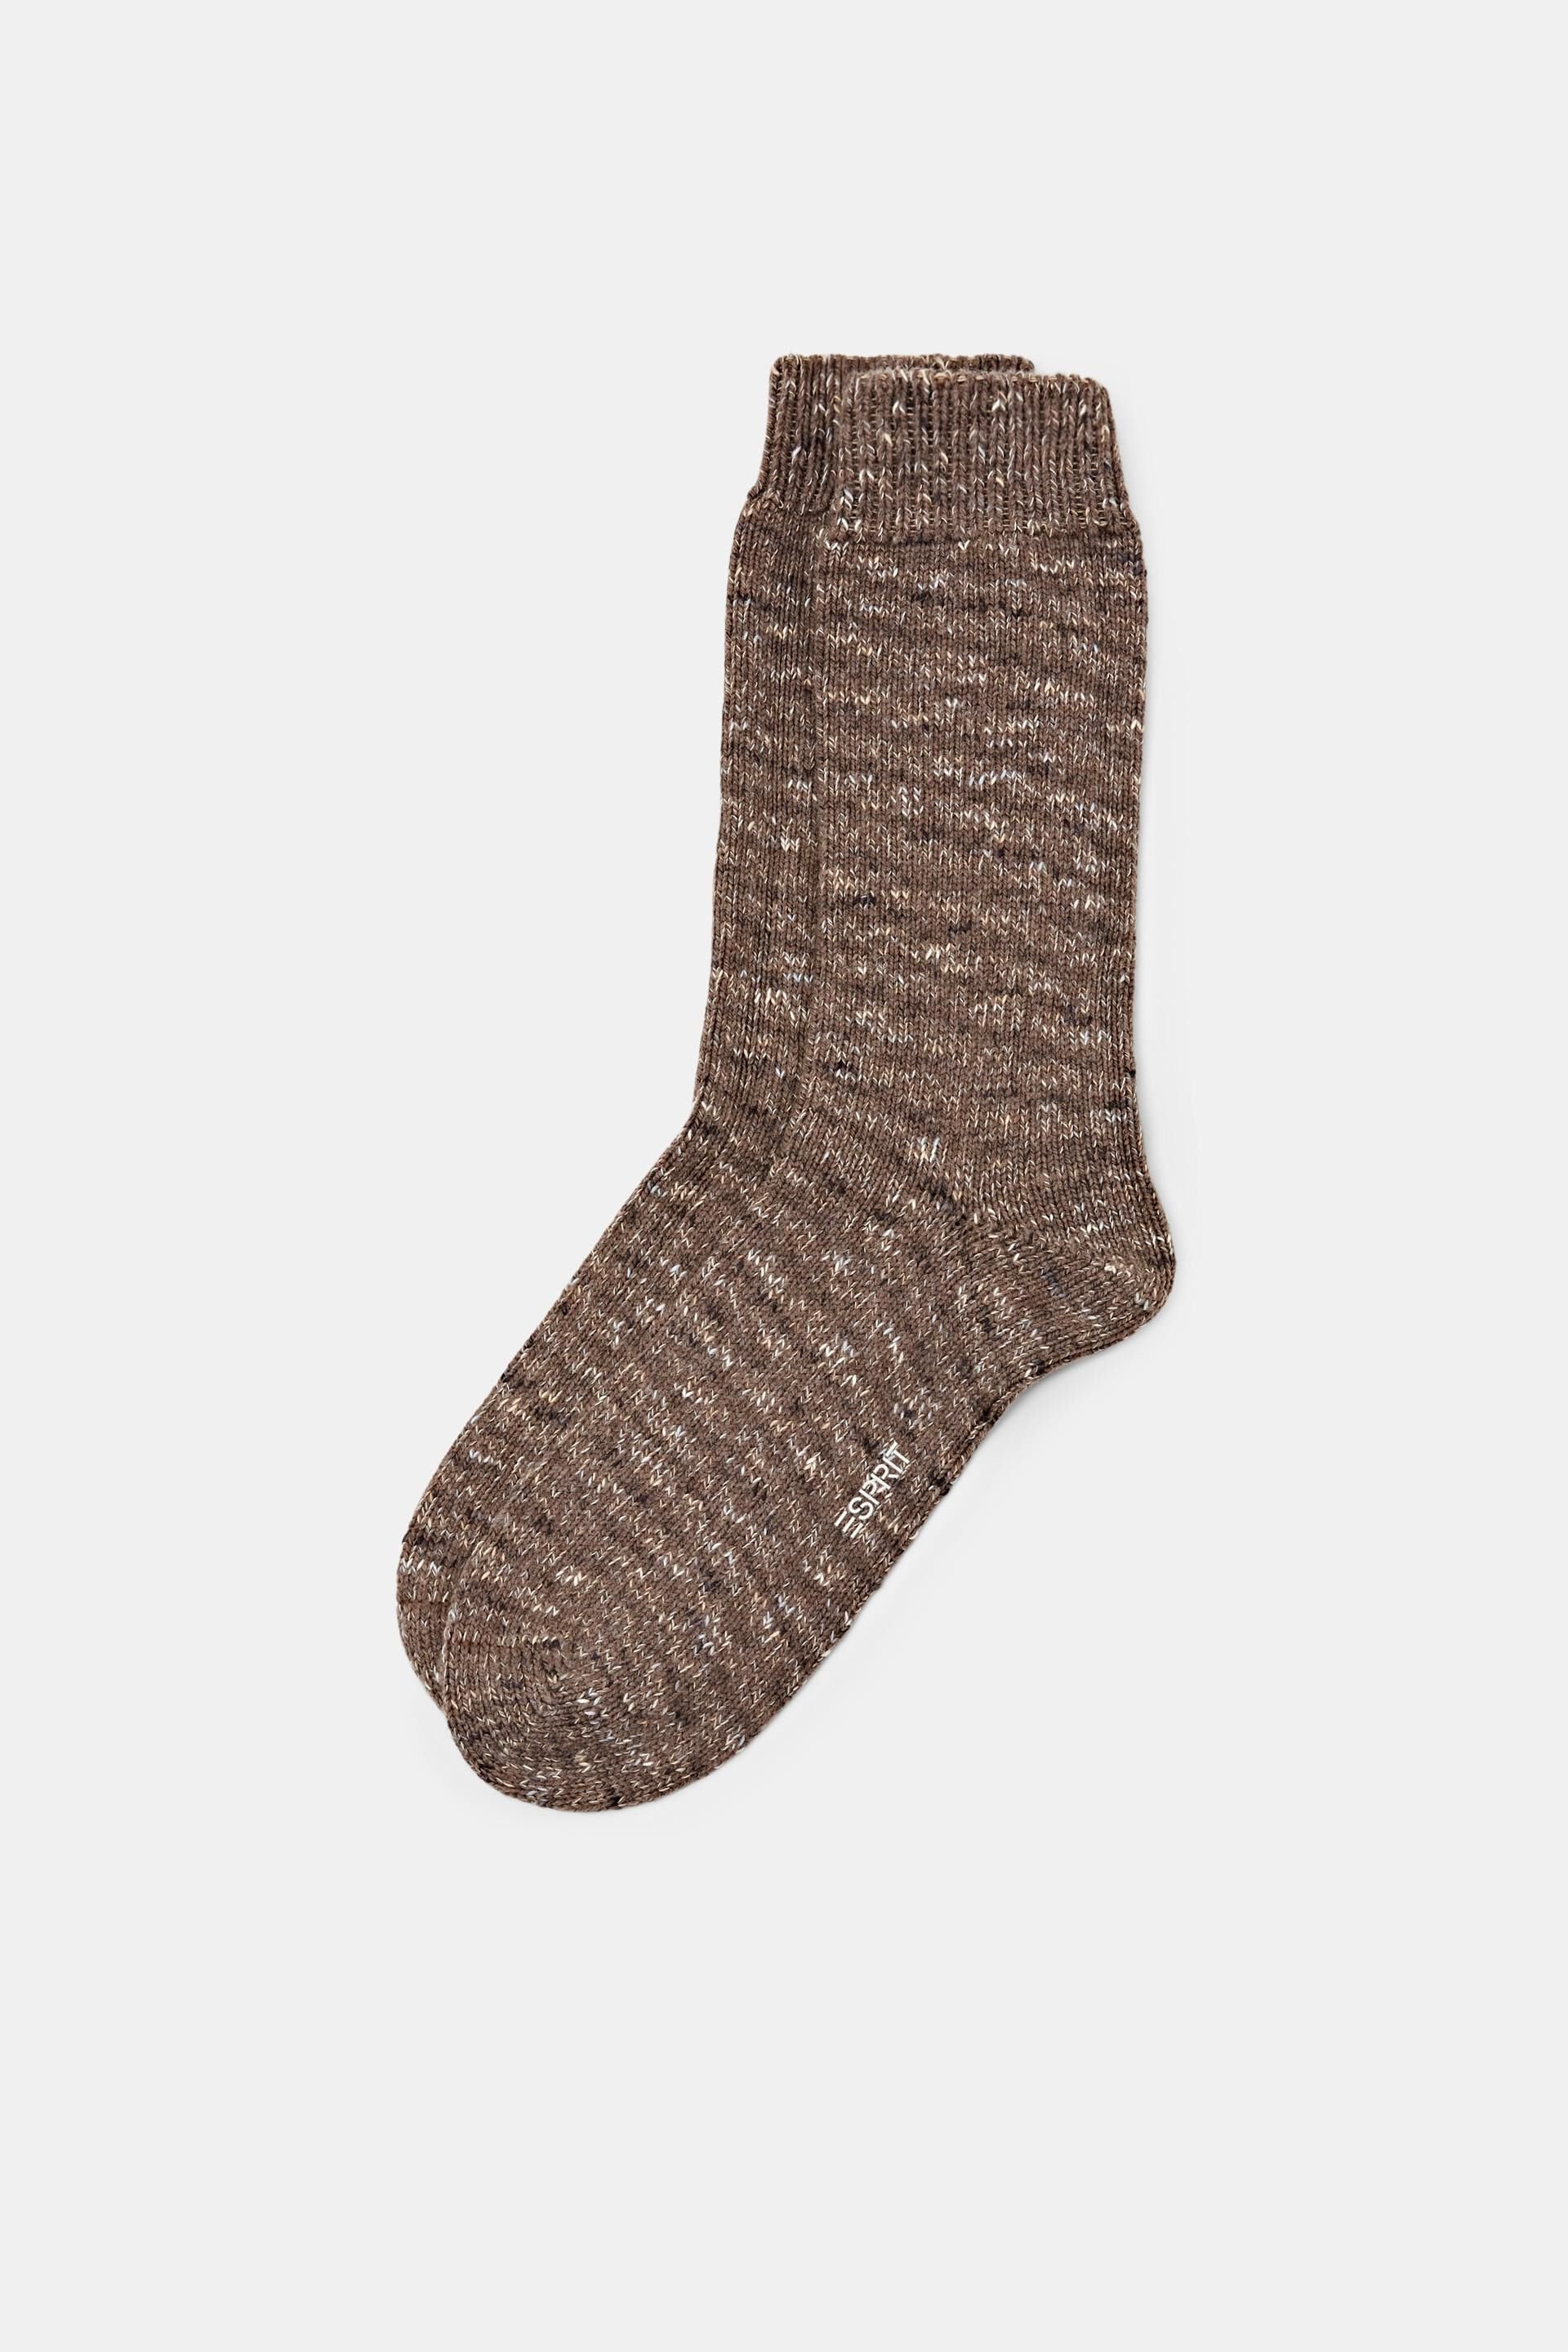 Esprit Online Store Chunky knit boot socks